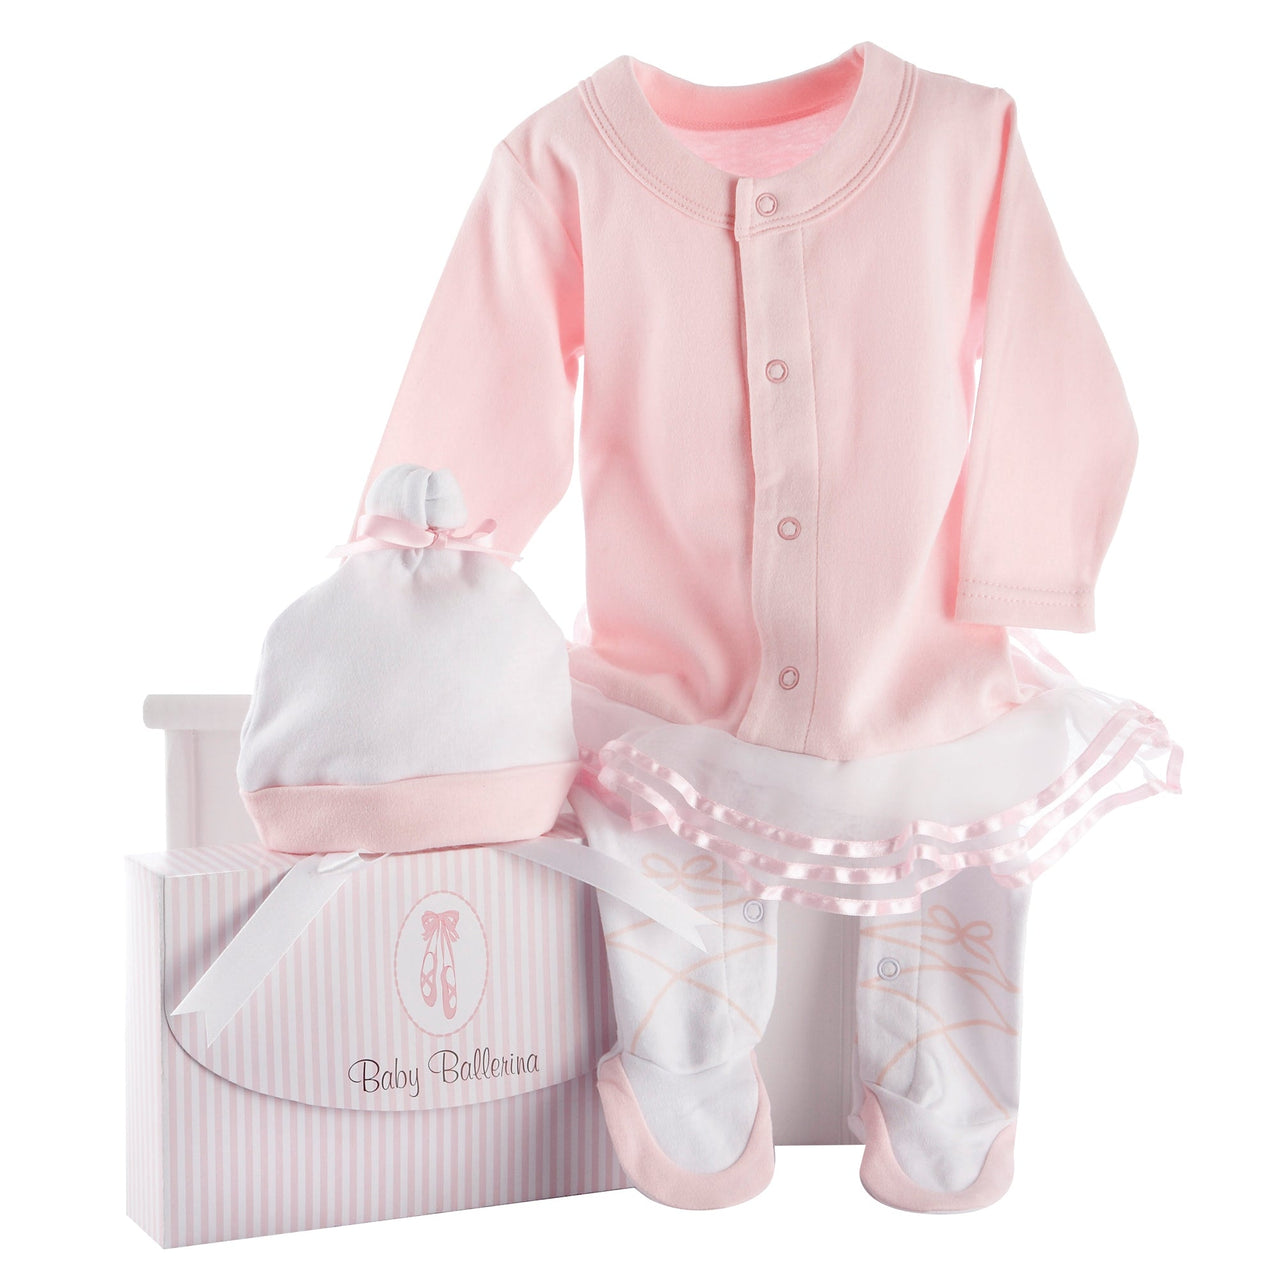 Big Dreamzzz Baby Ballerina 2-Piece Layette Set  (Personalization Available)